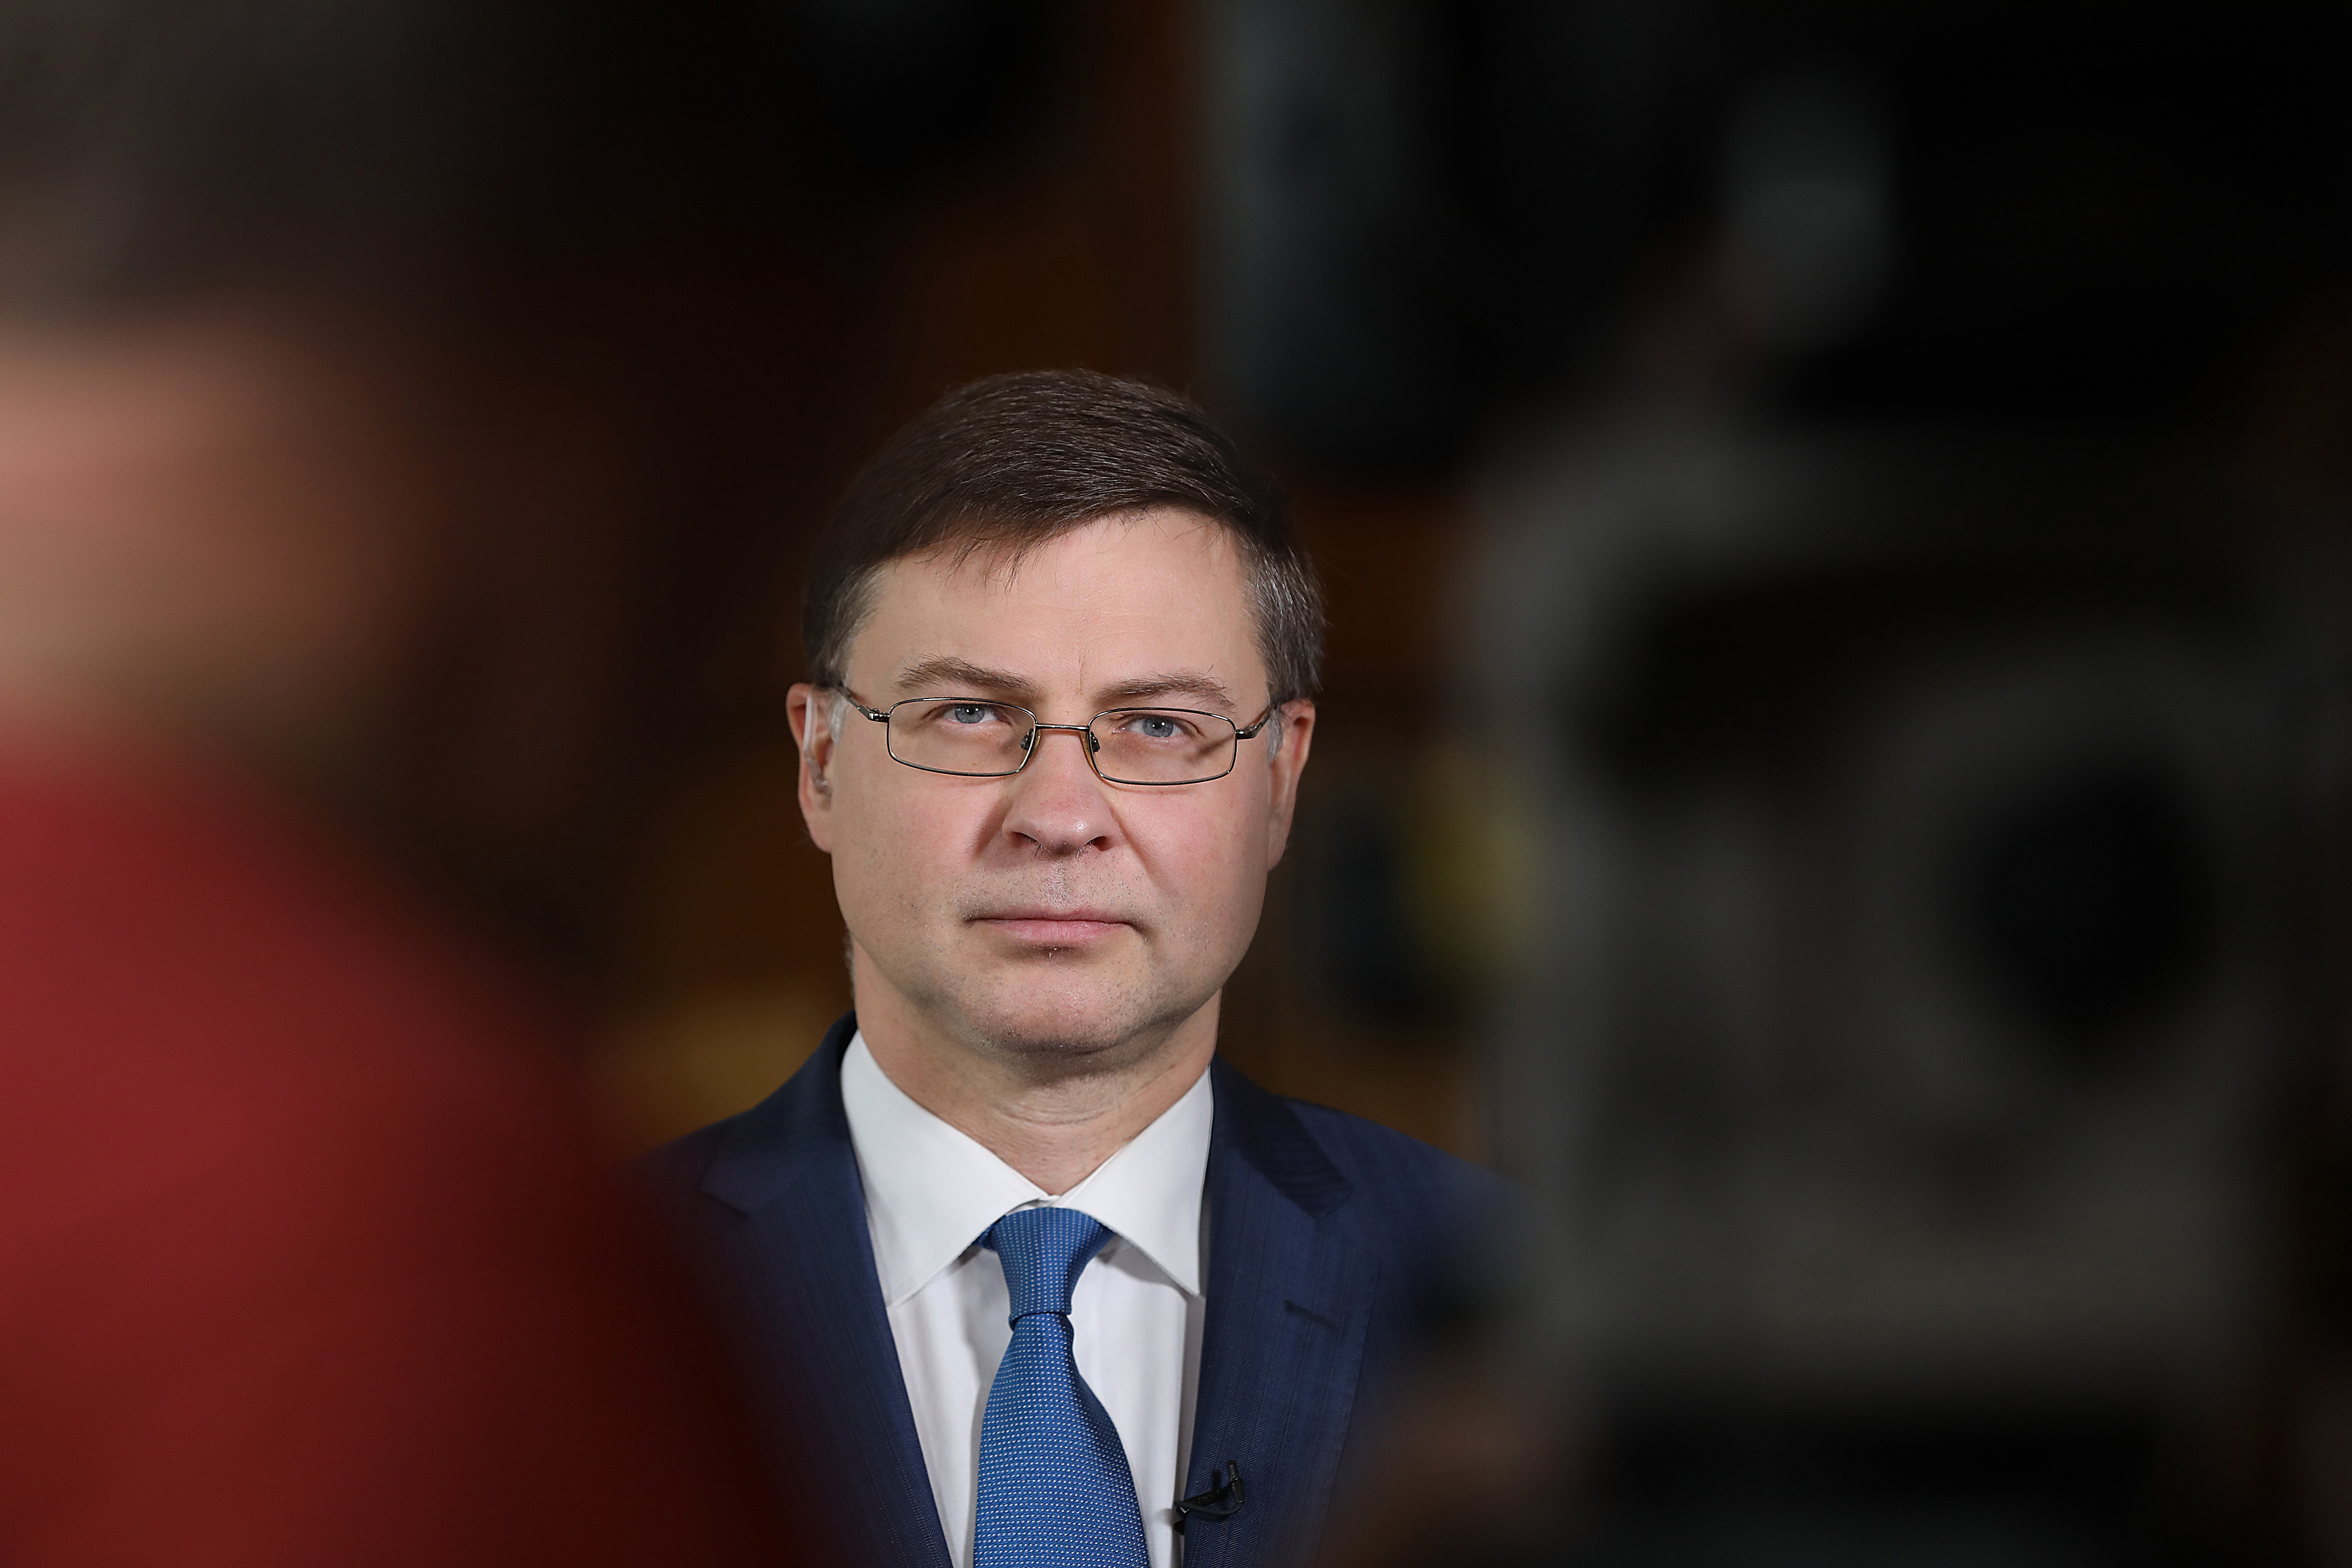 Valdis Dombrovskis will certainly mark a change from his predecessor.